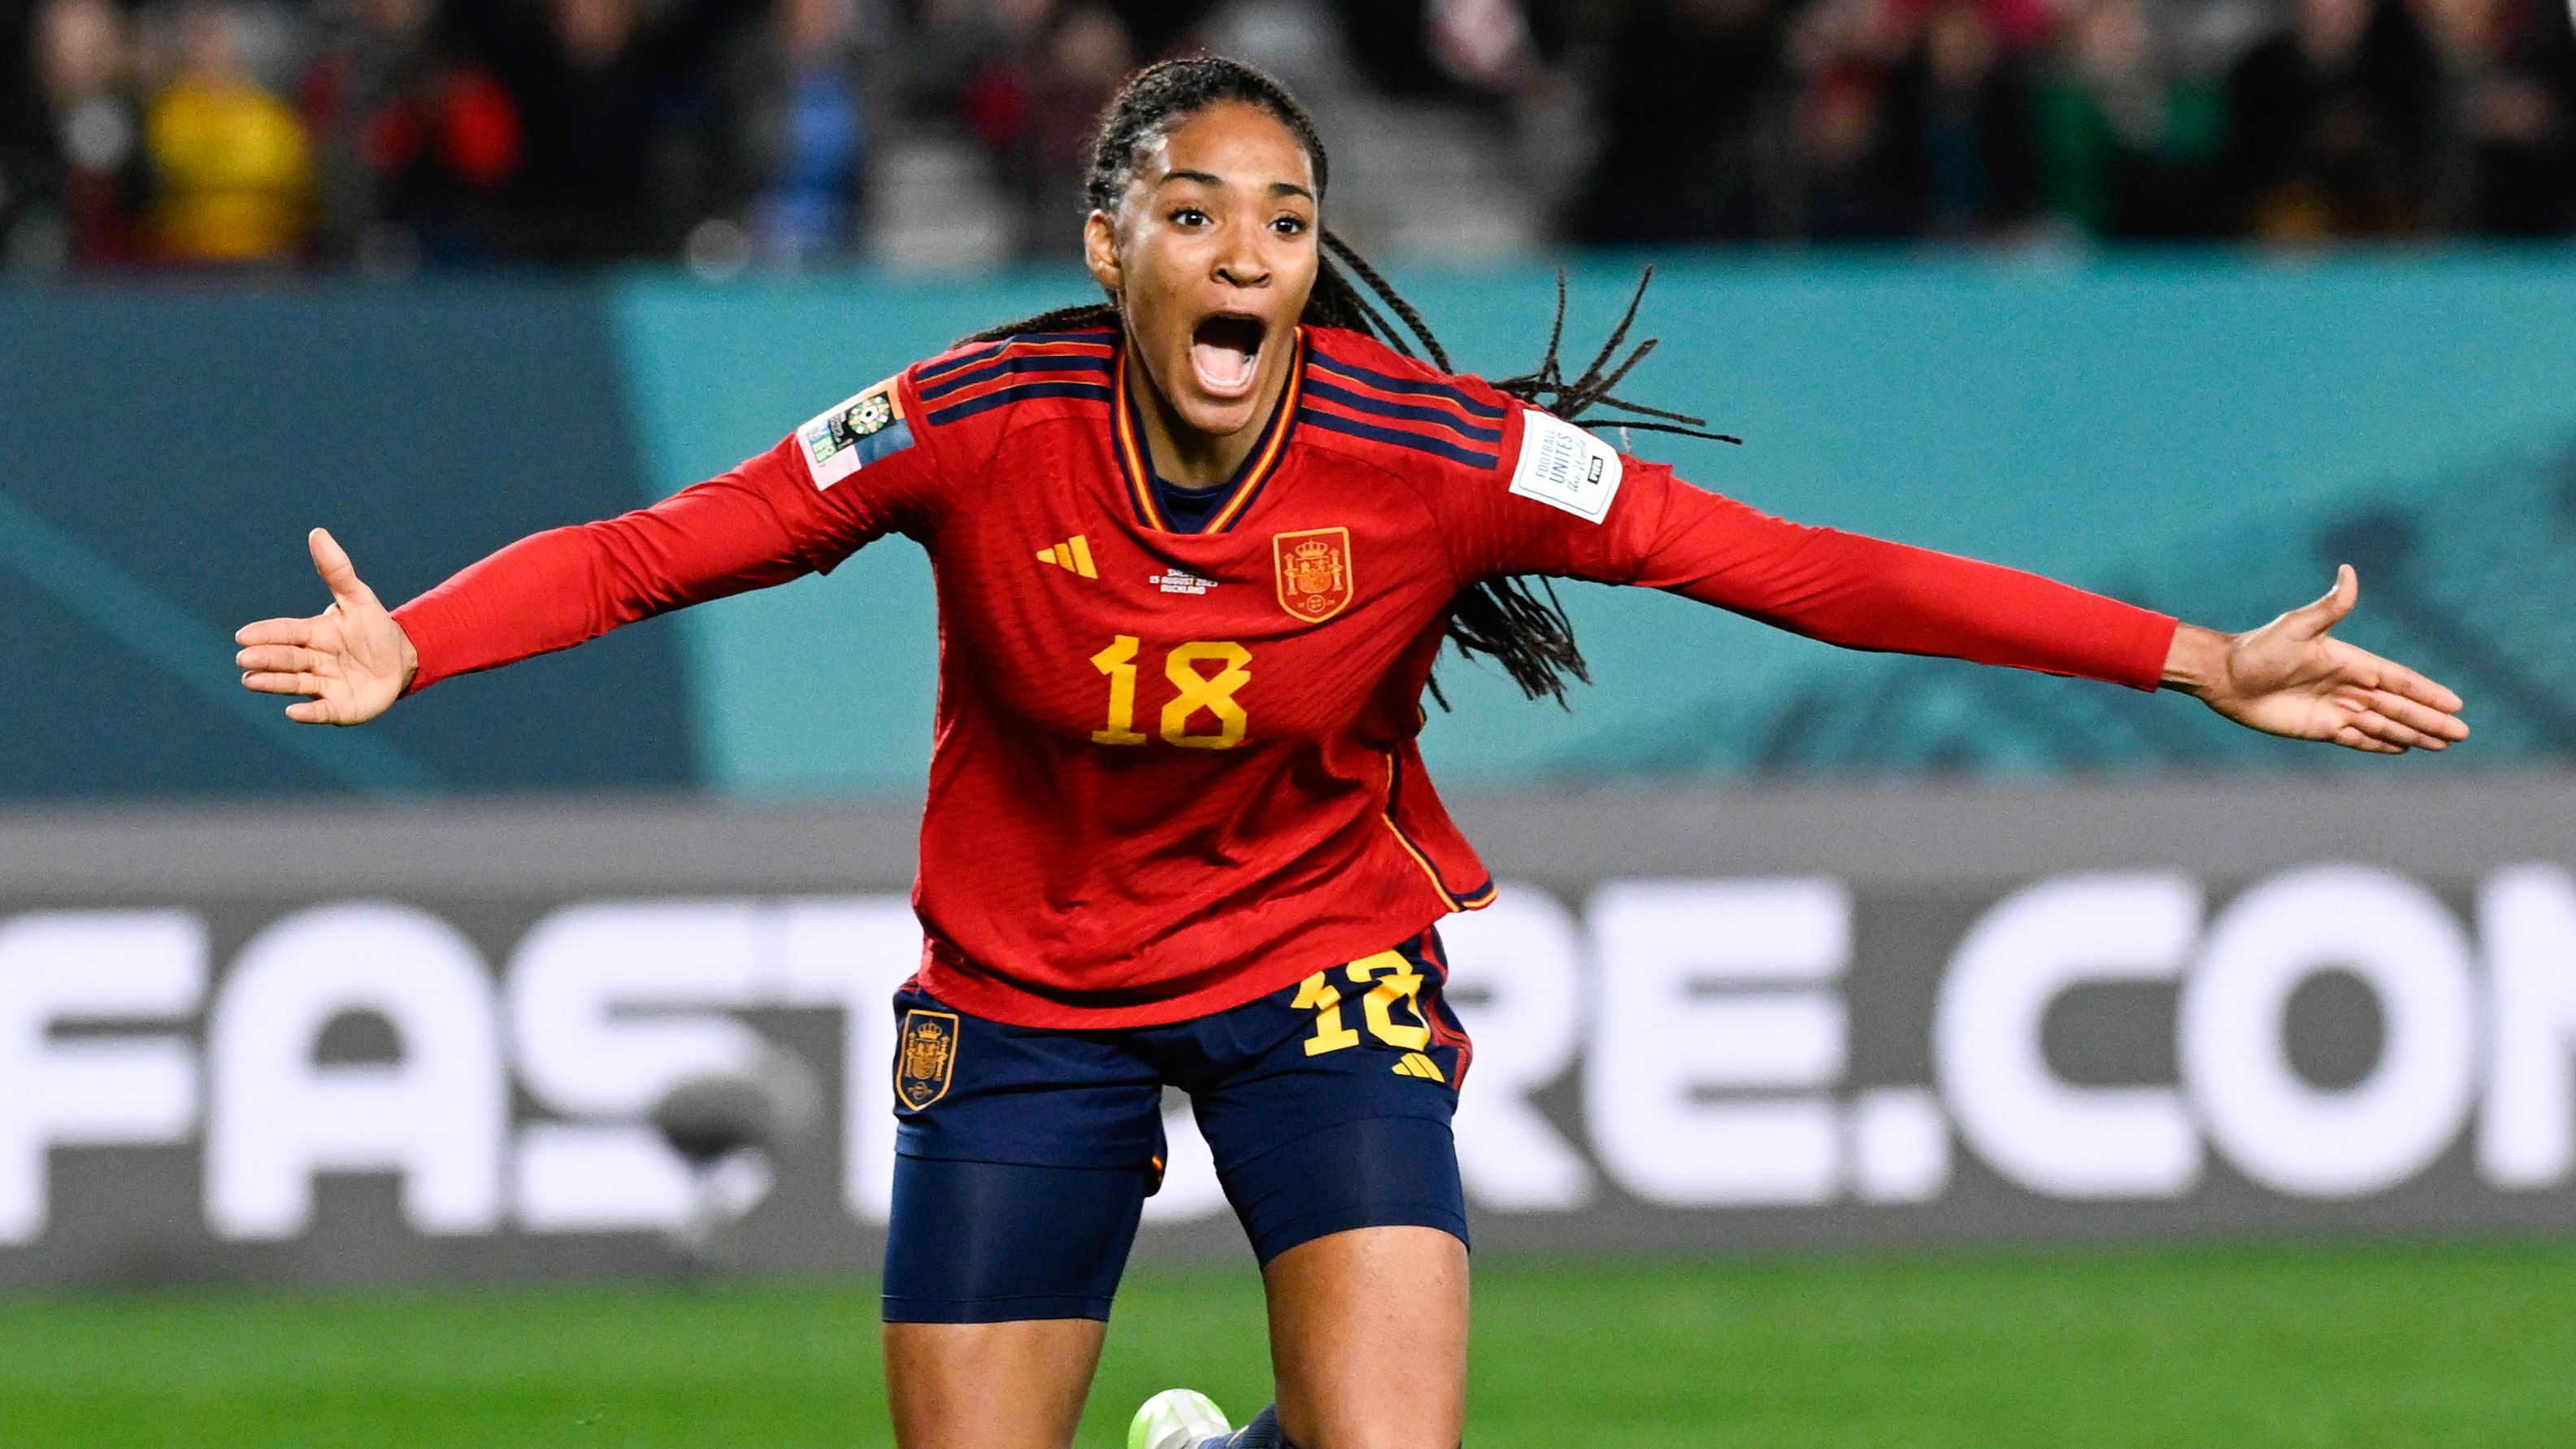 Salma Paralluelo of Spain celebrates after scoring her team's first goal in the World Cup semifinal against Sweden on Tuesday, Aug. 15, 2023. (AP Photo/Andrew Cornaga)